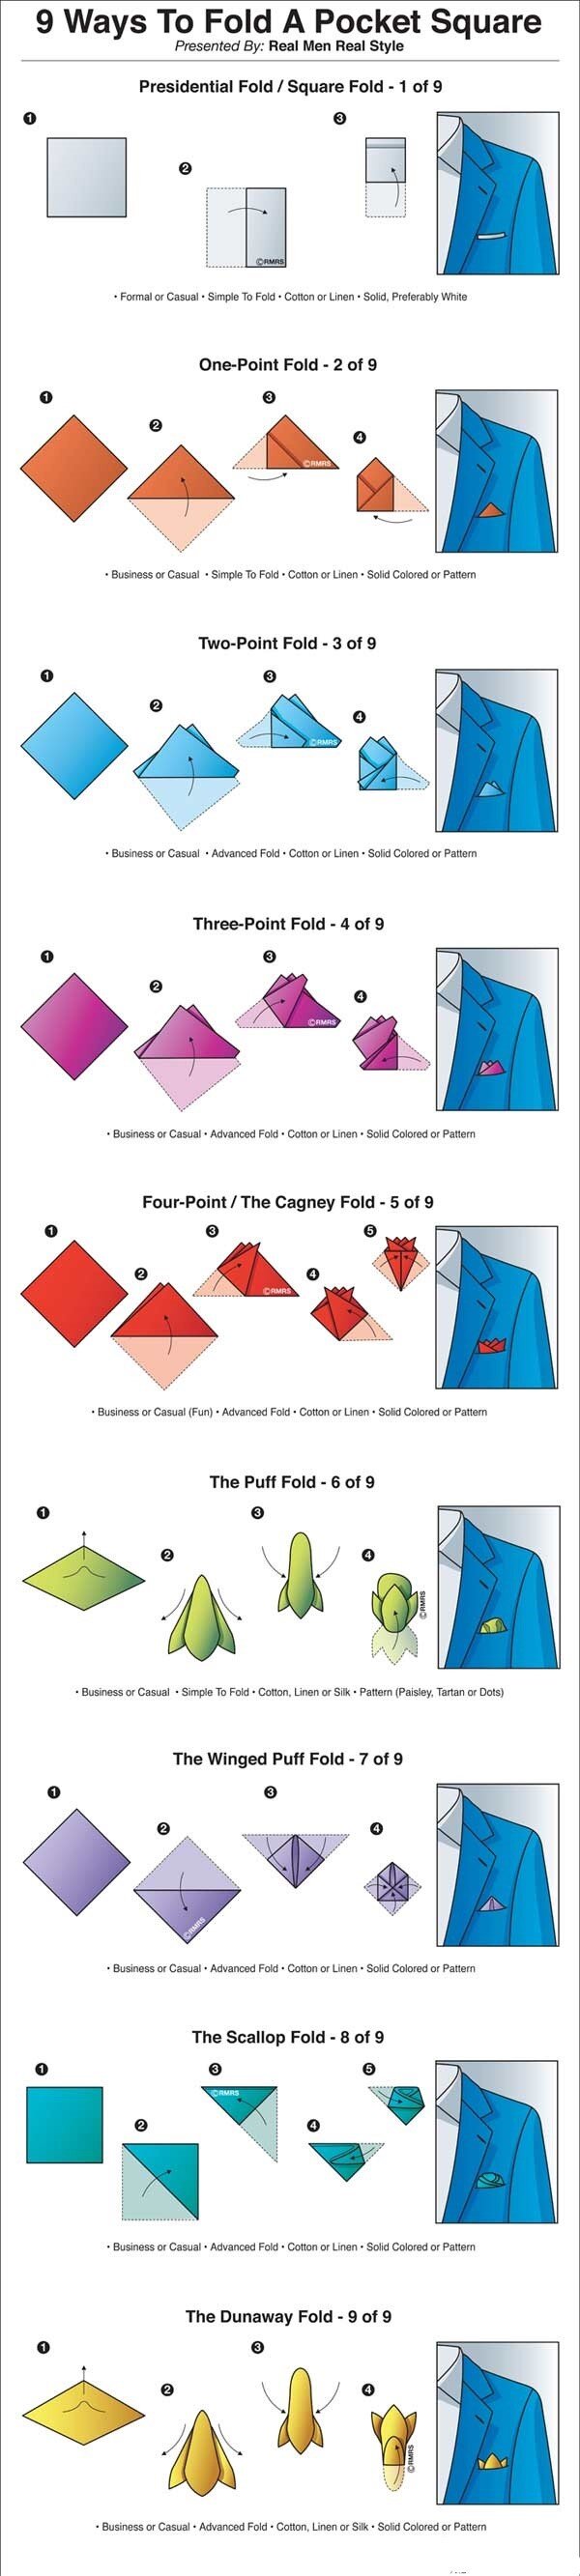 Pocket Square Rules And Etiquette In 2020 Suityourself